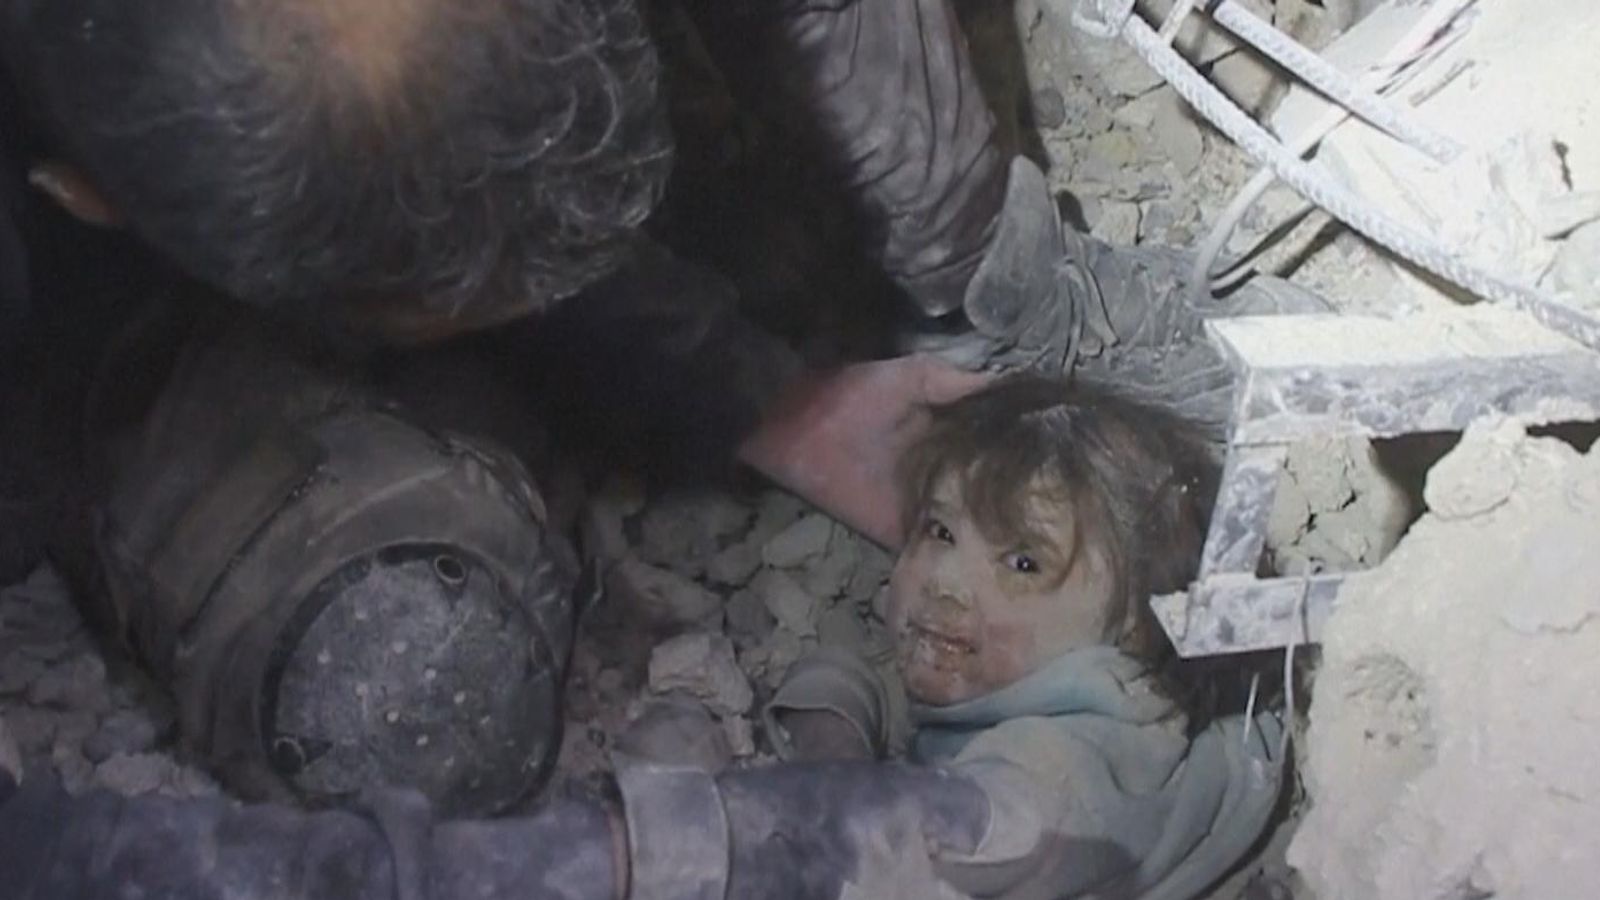 Turkey-Syria earthquake: Moment young girl pulled from rubble of building in Syria